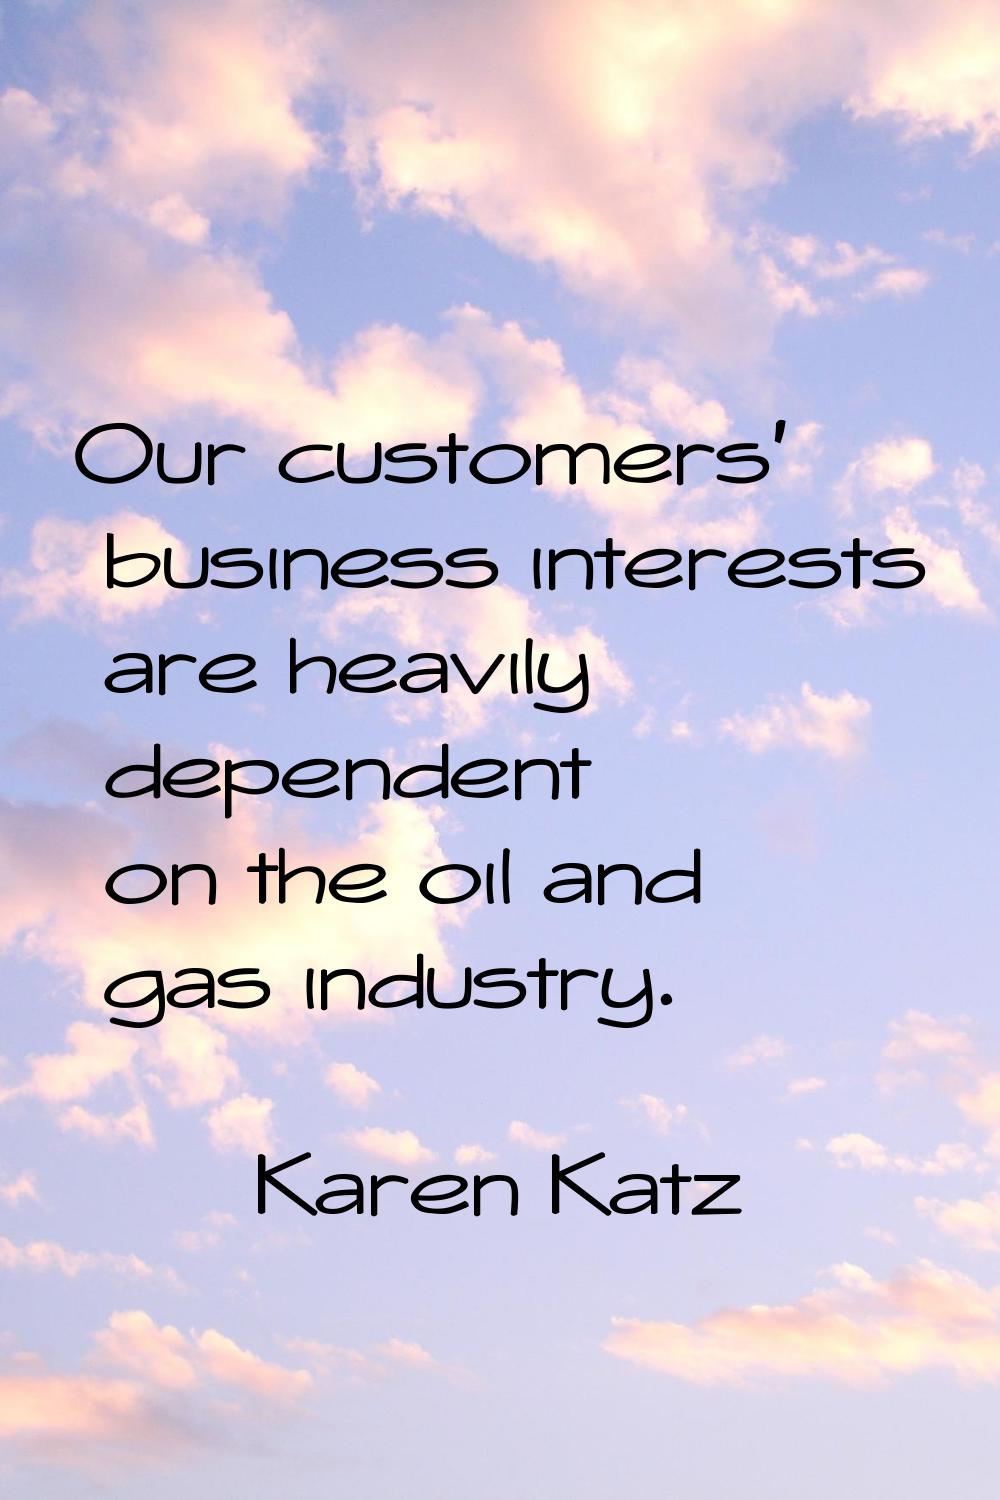 Our customers' business interests are heavily dependent on the oil and gas industry.